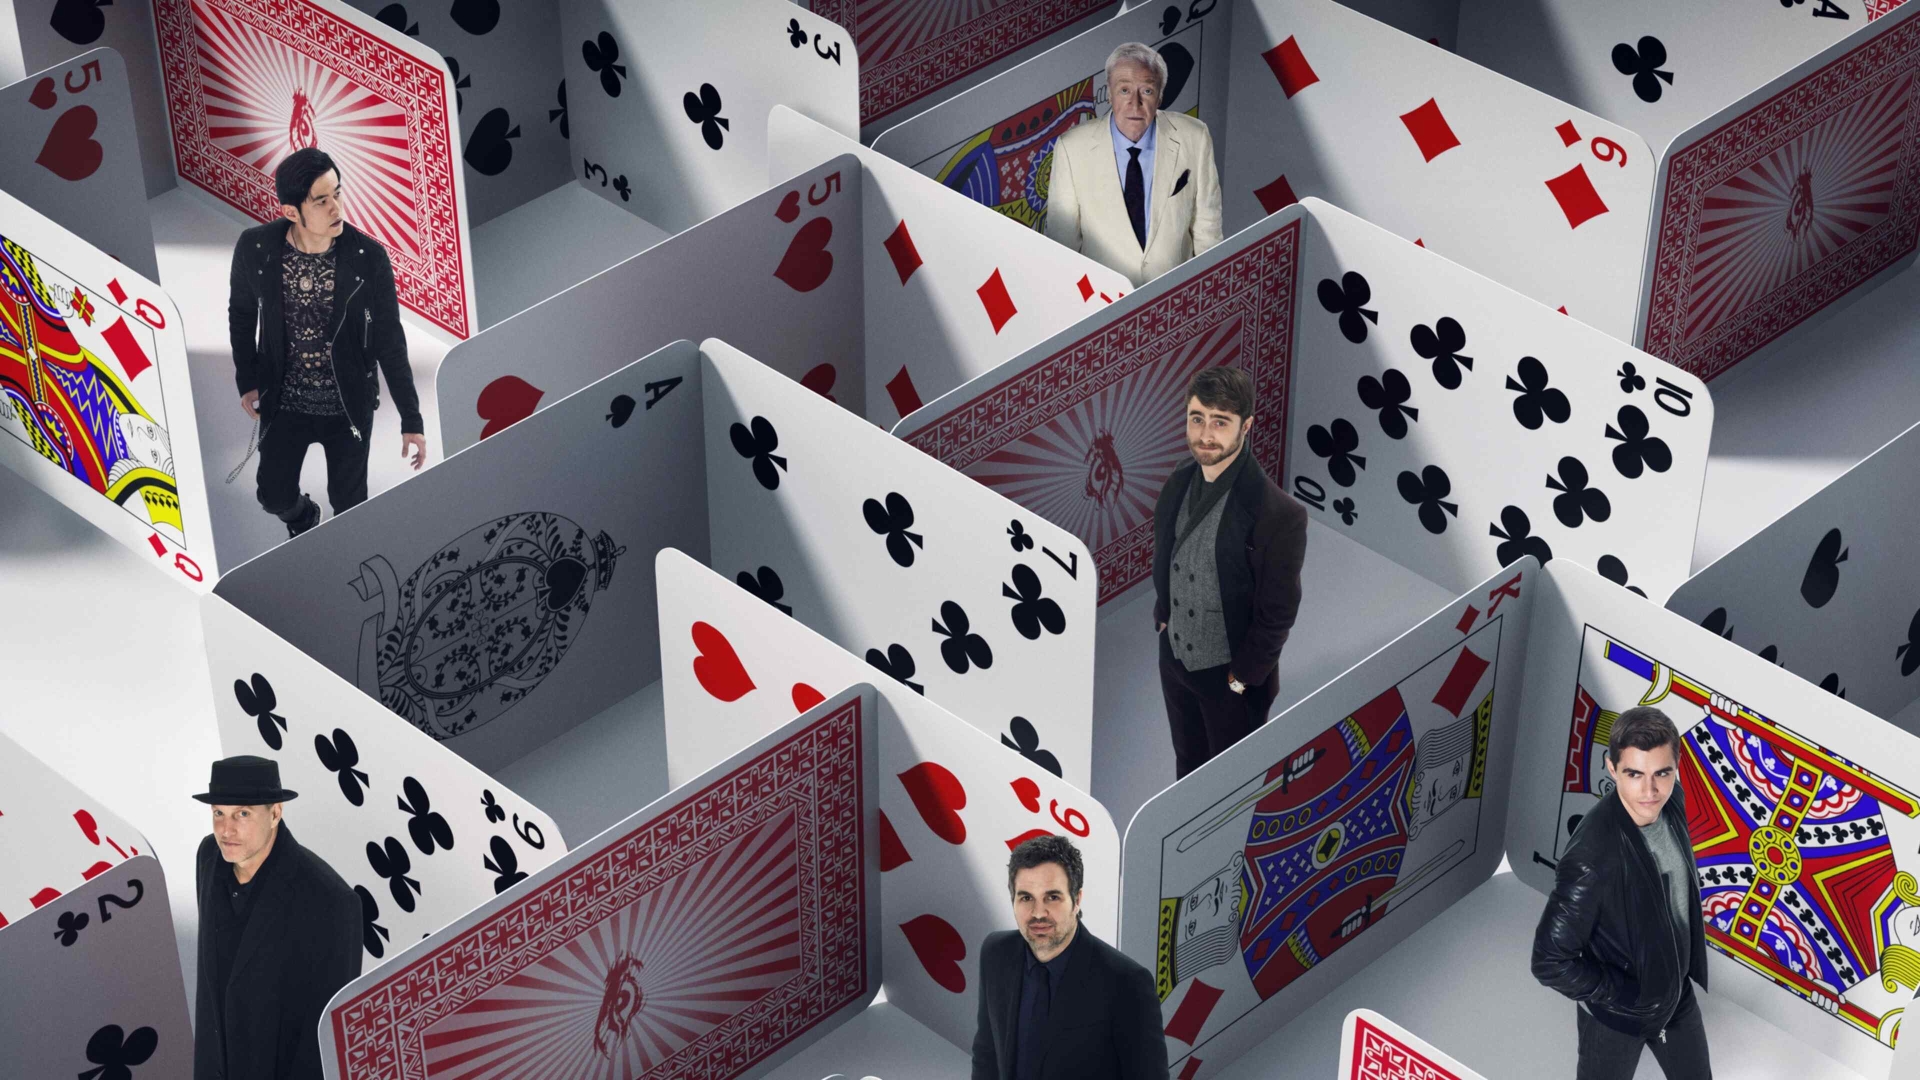 Now You See Me 2 (Now You See Me 2)